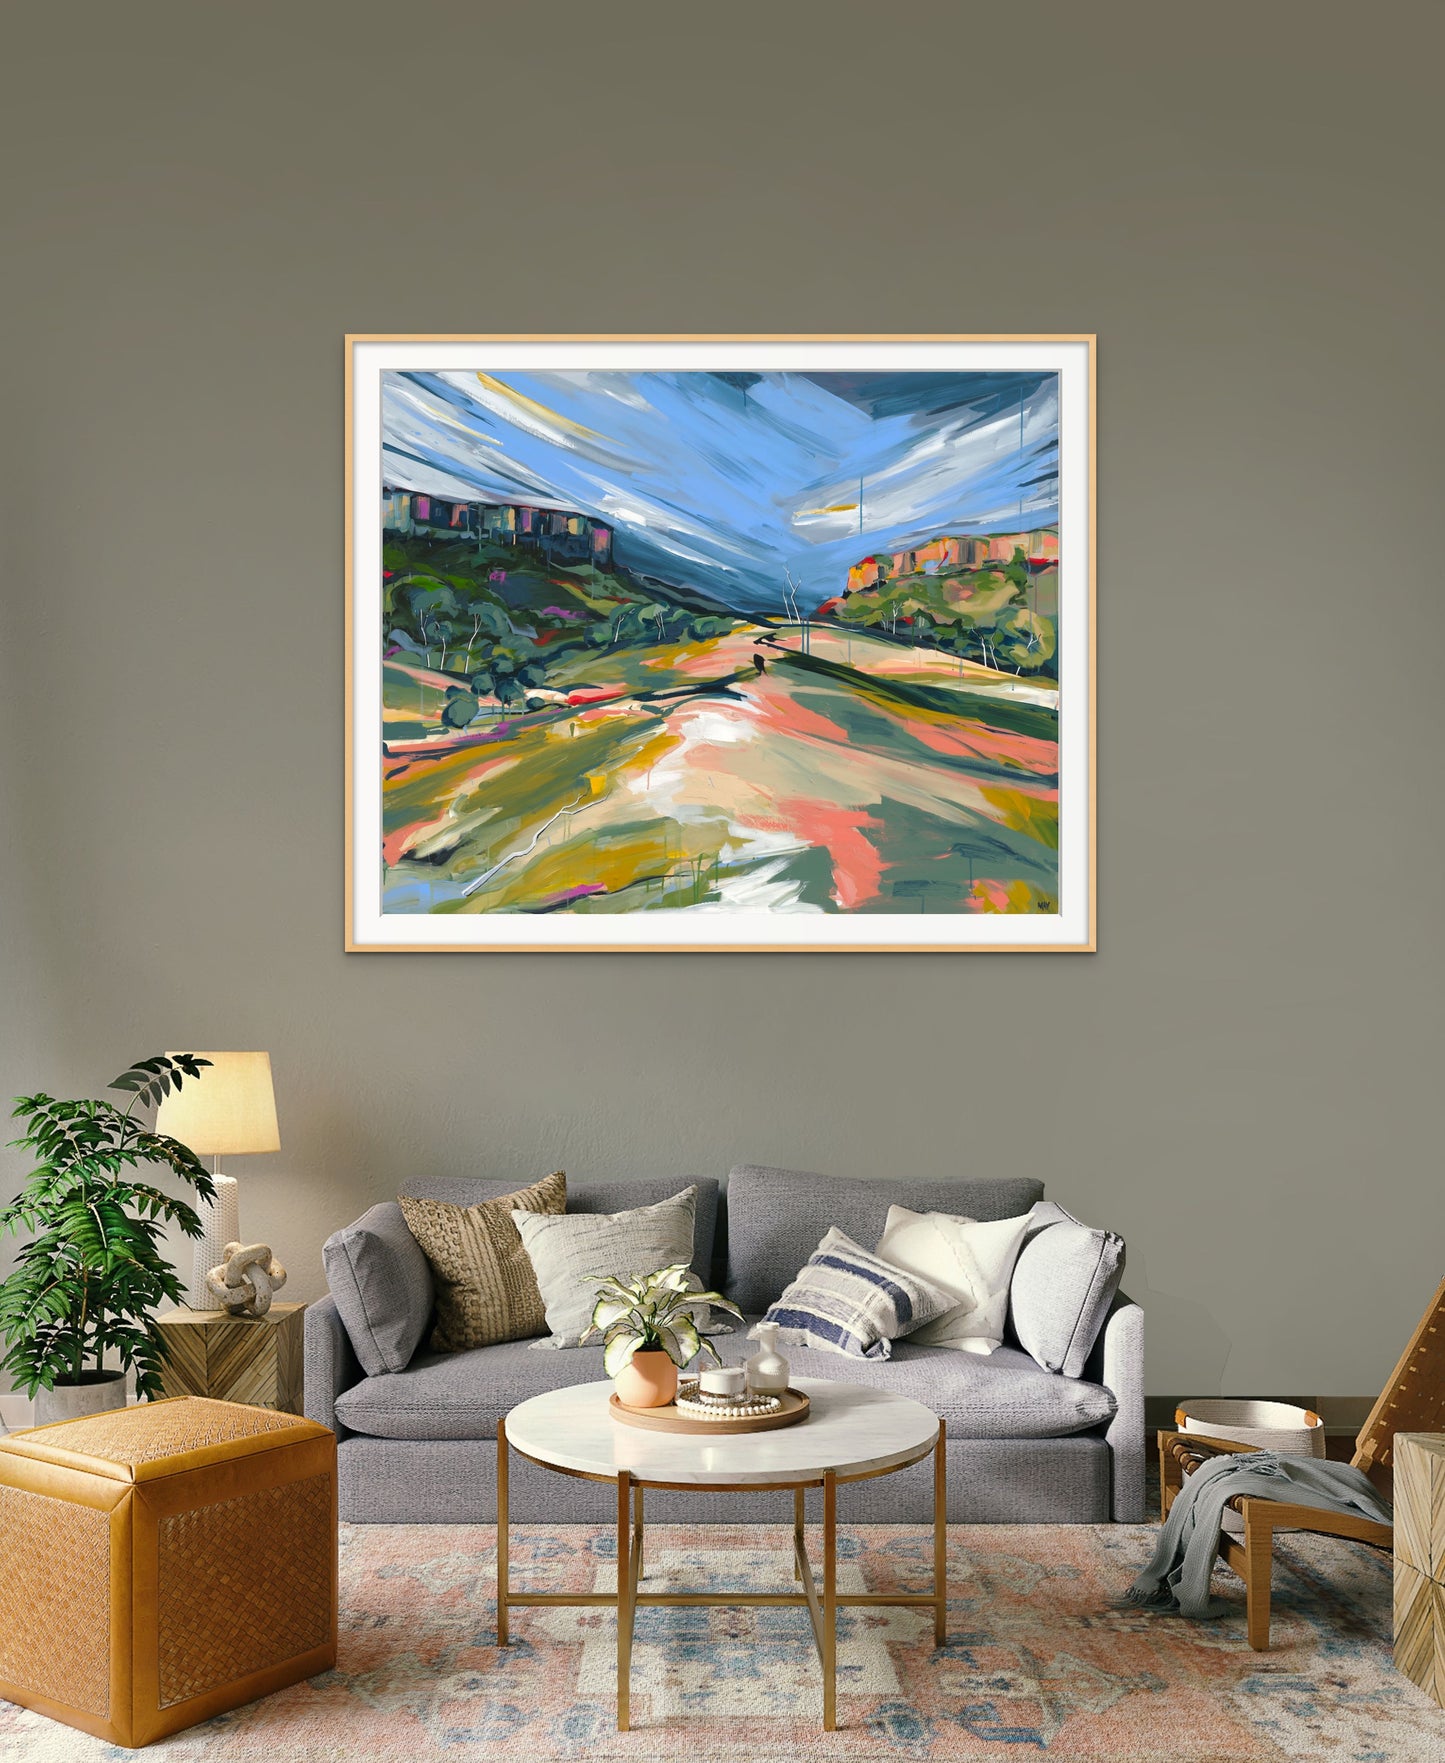 The Dark and The Light Fine Art Reproduction Print of Landscape Painting at Cania Gorge National Park by Helen May Artist